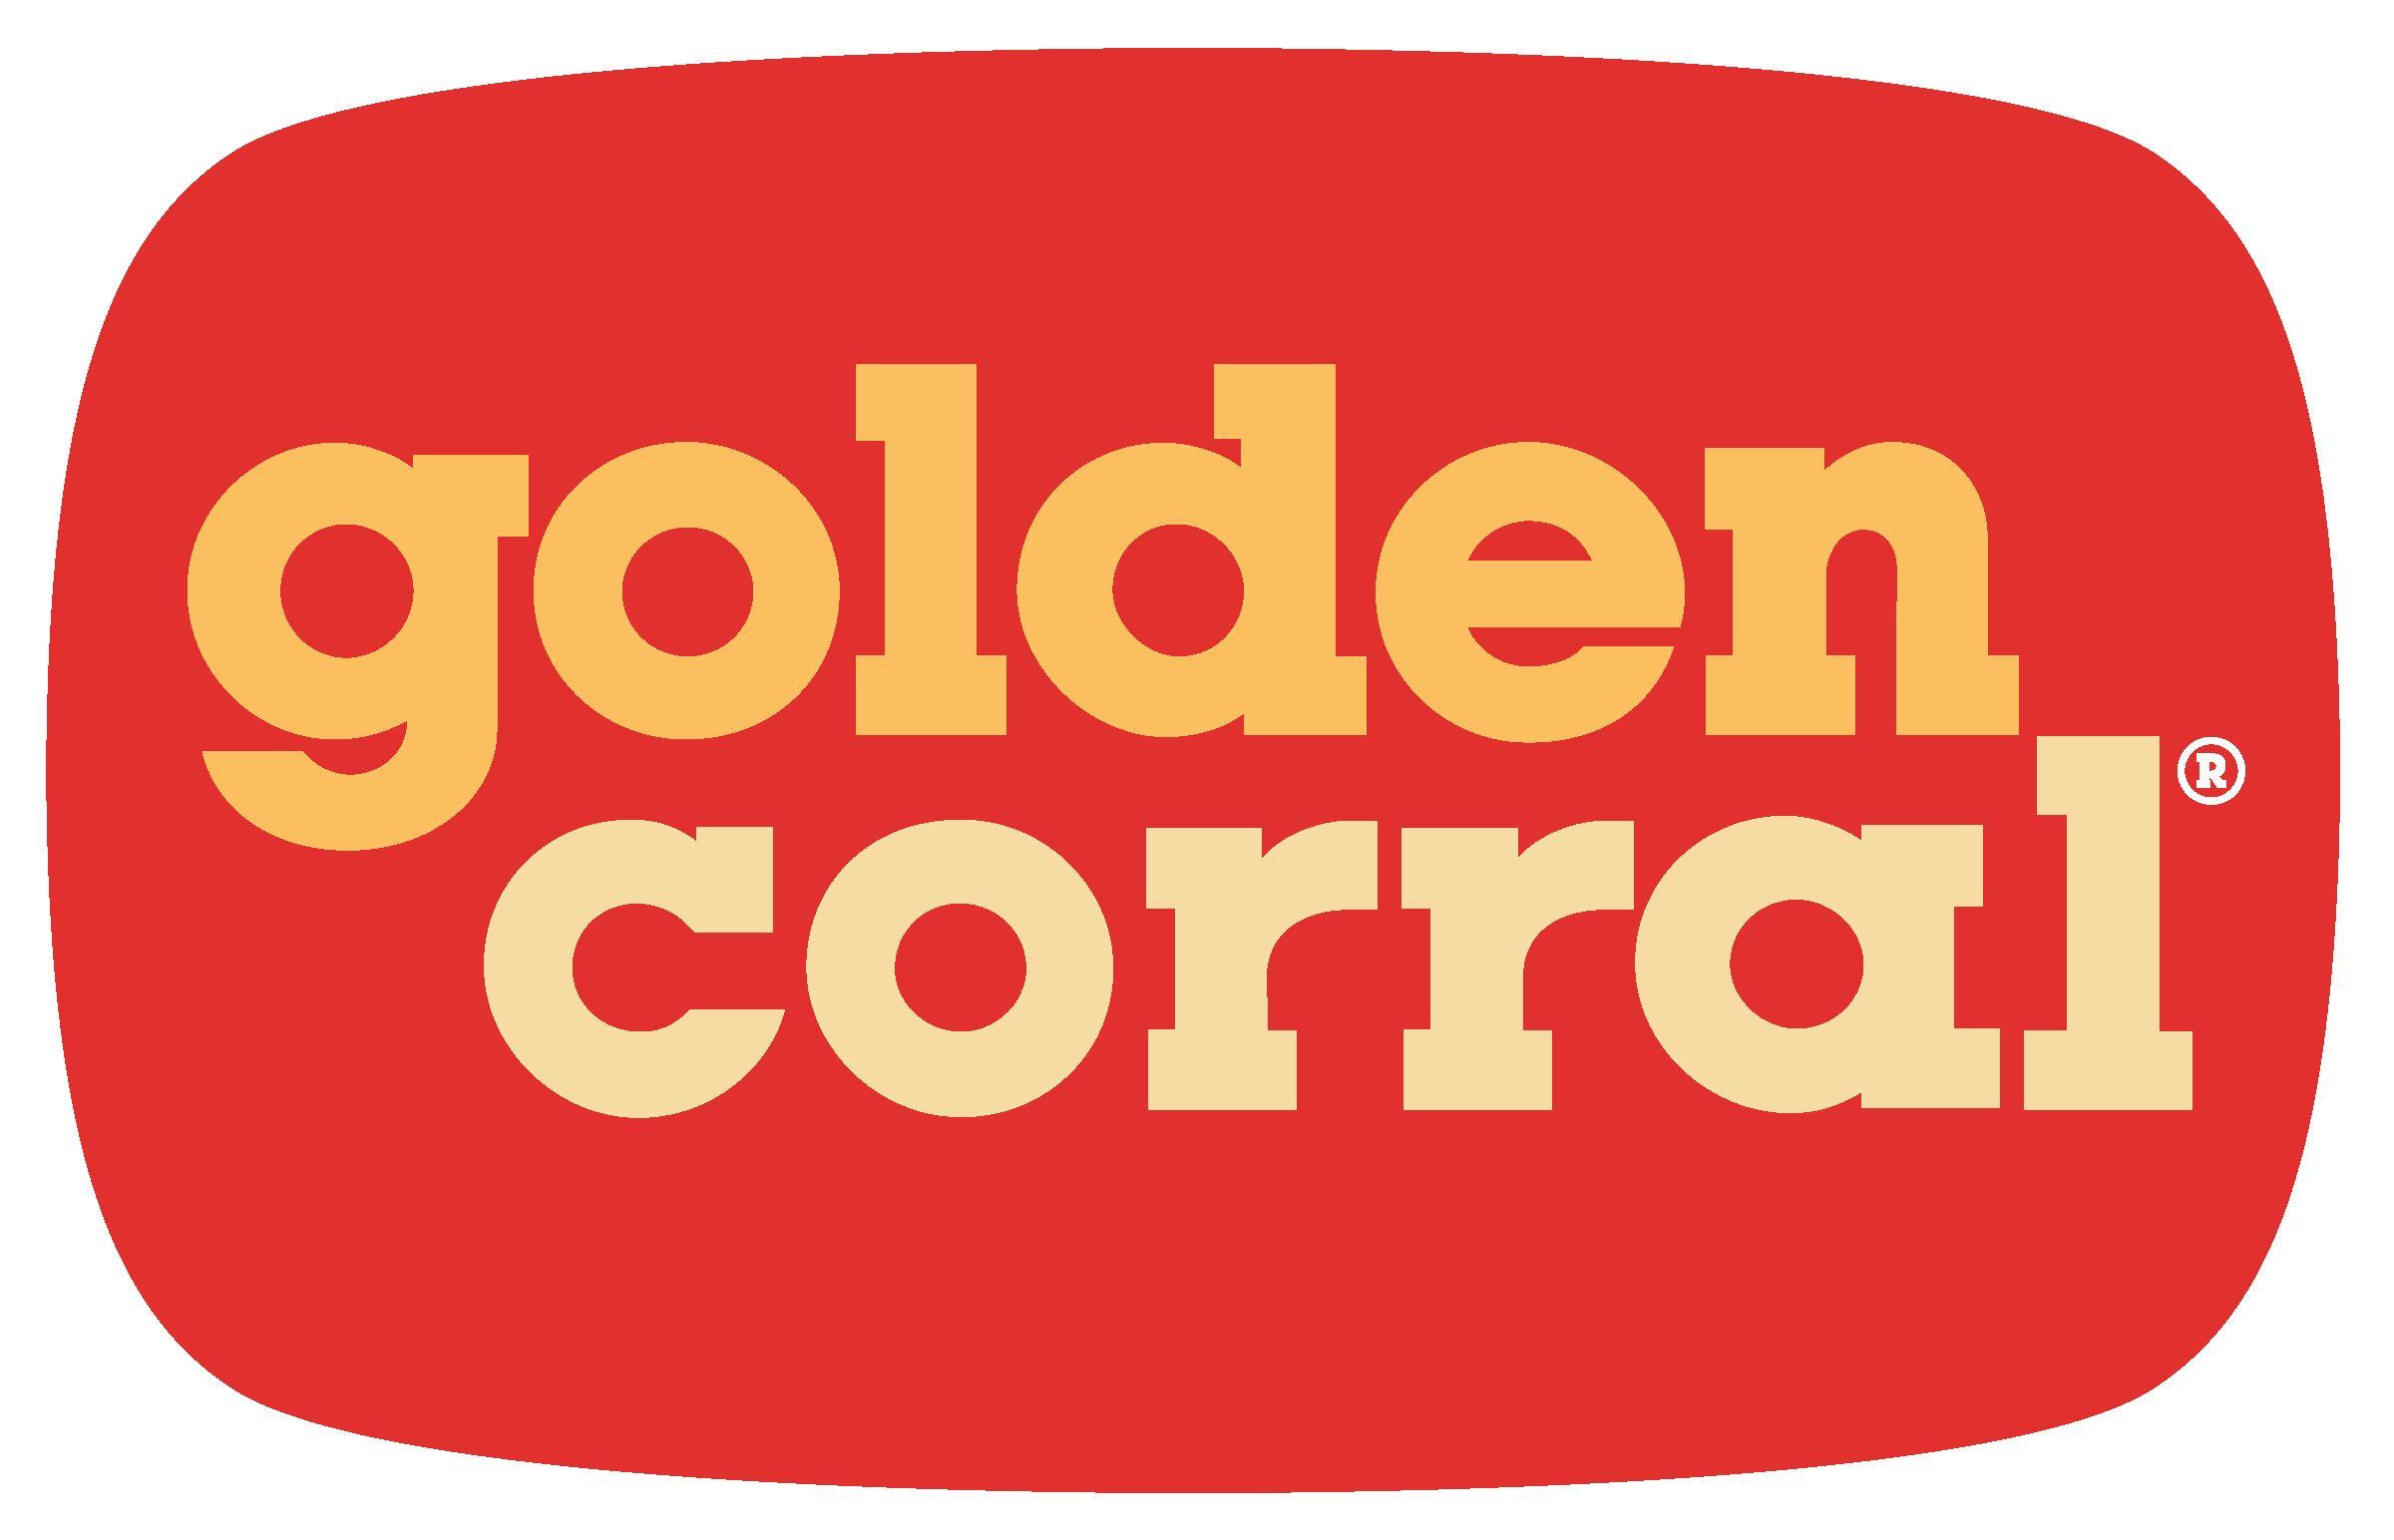 Golden X Logo - Golden Corral - America's #1 Buffet and Grill